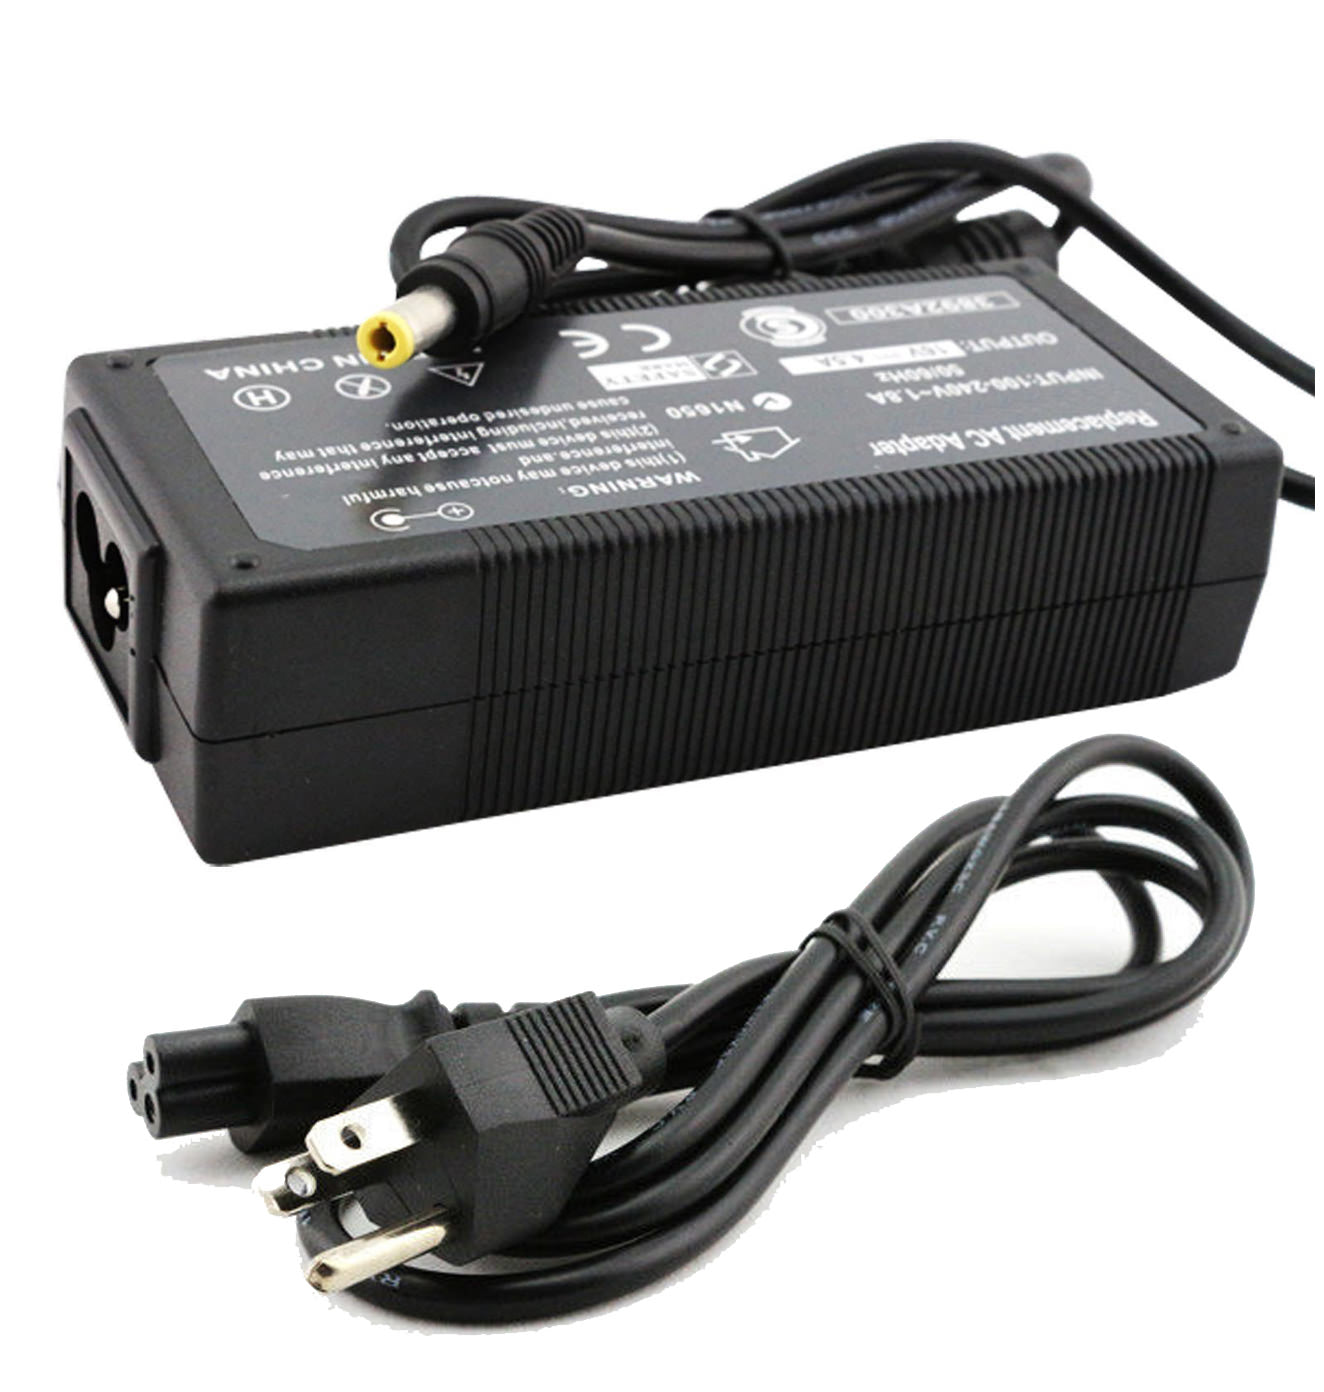 AC Adapter Charger for IBM ThinkPad T42 Notebook.